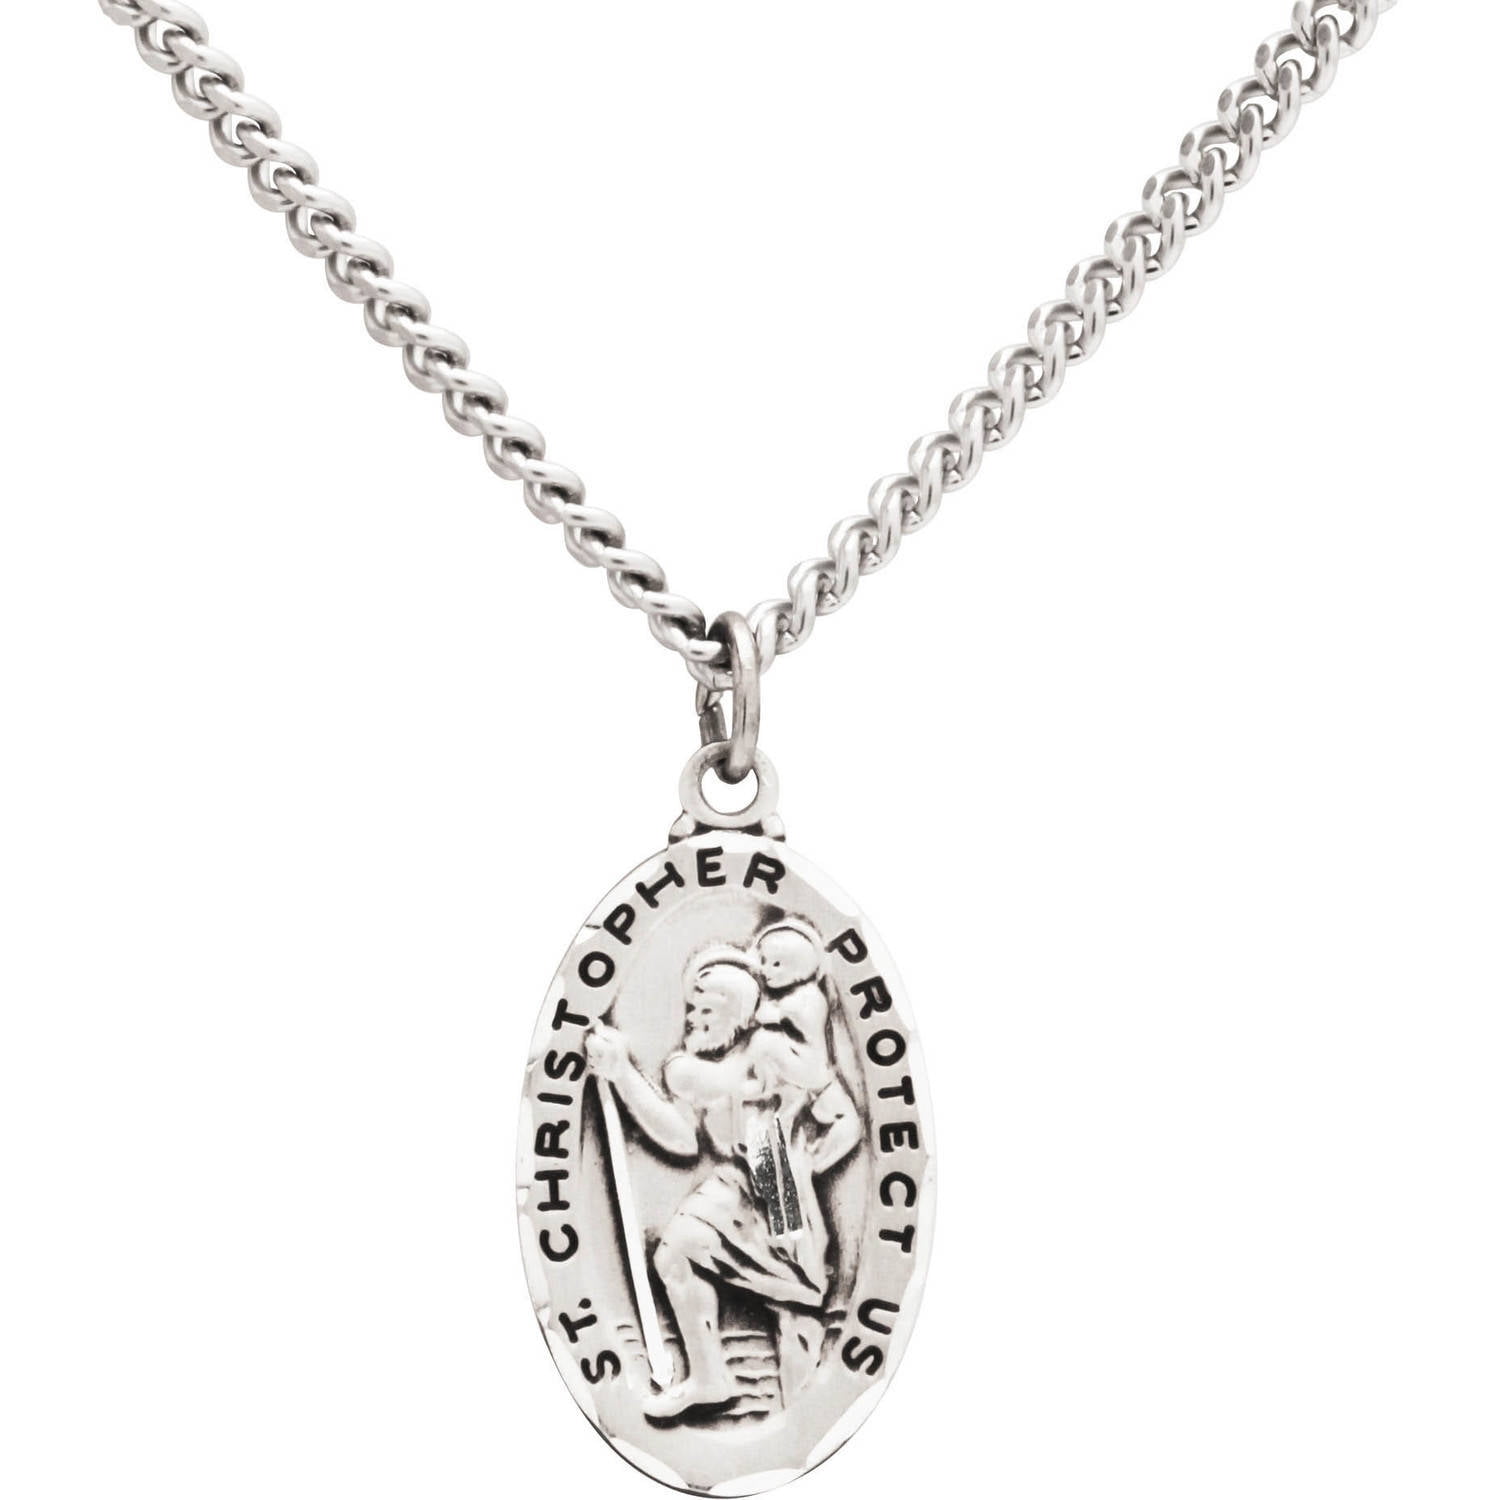 Christopher Pendant Sterling Silver Oval St